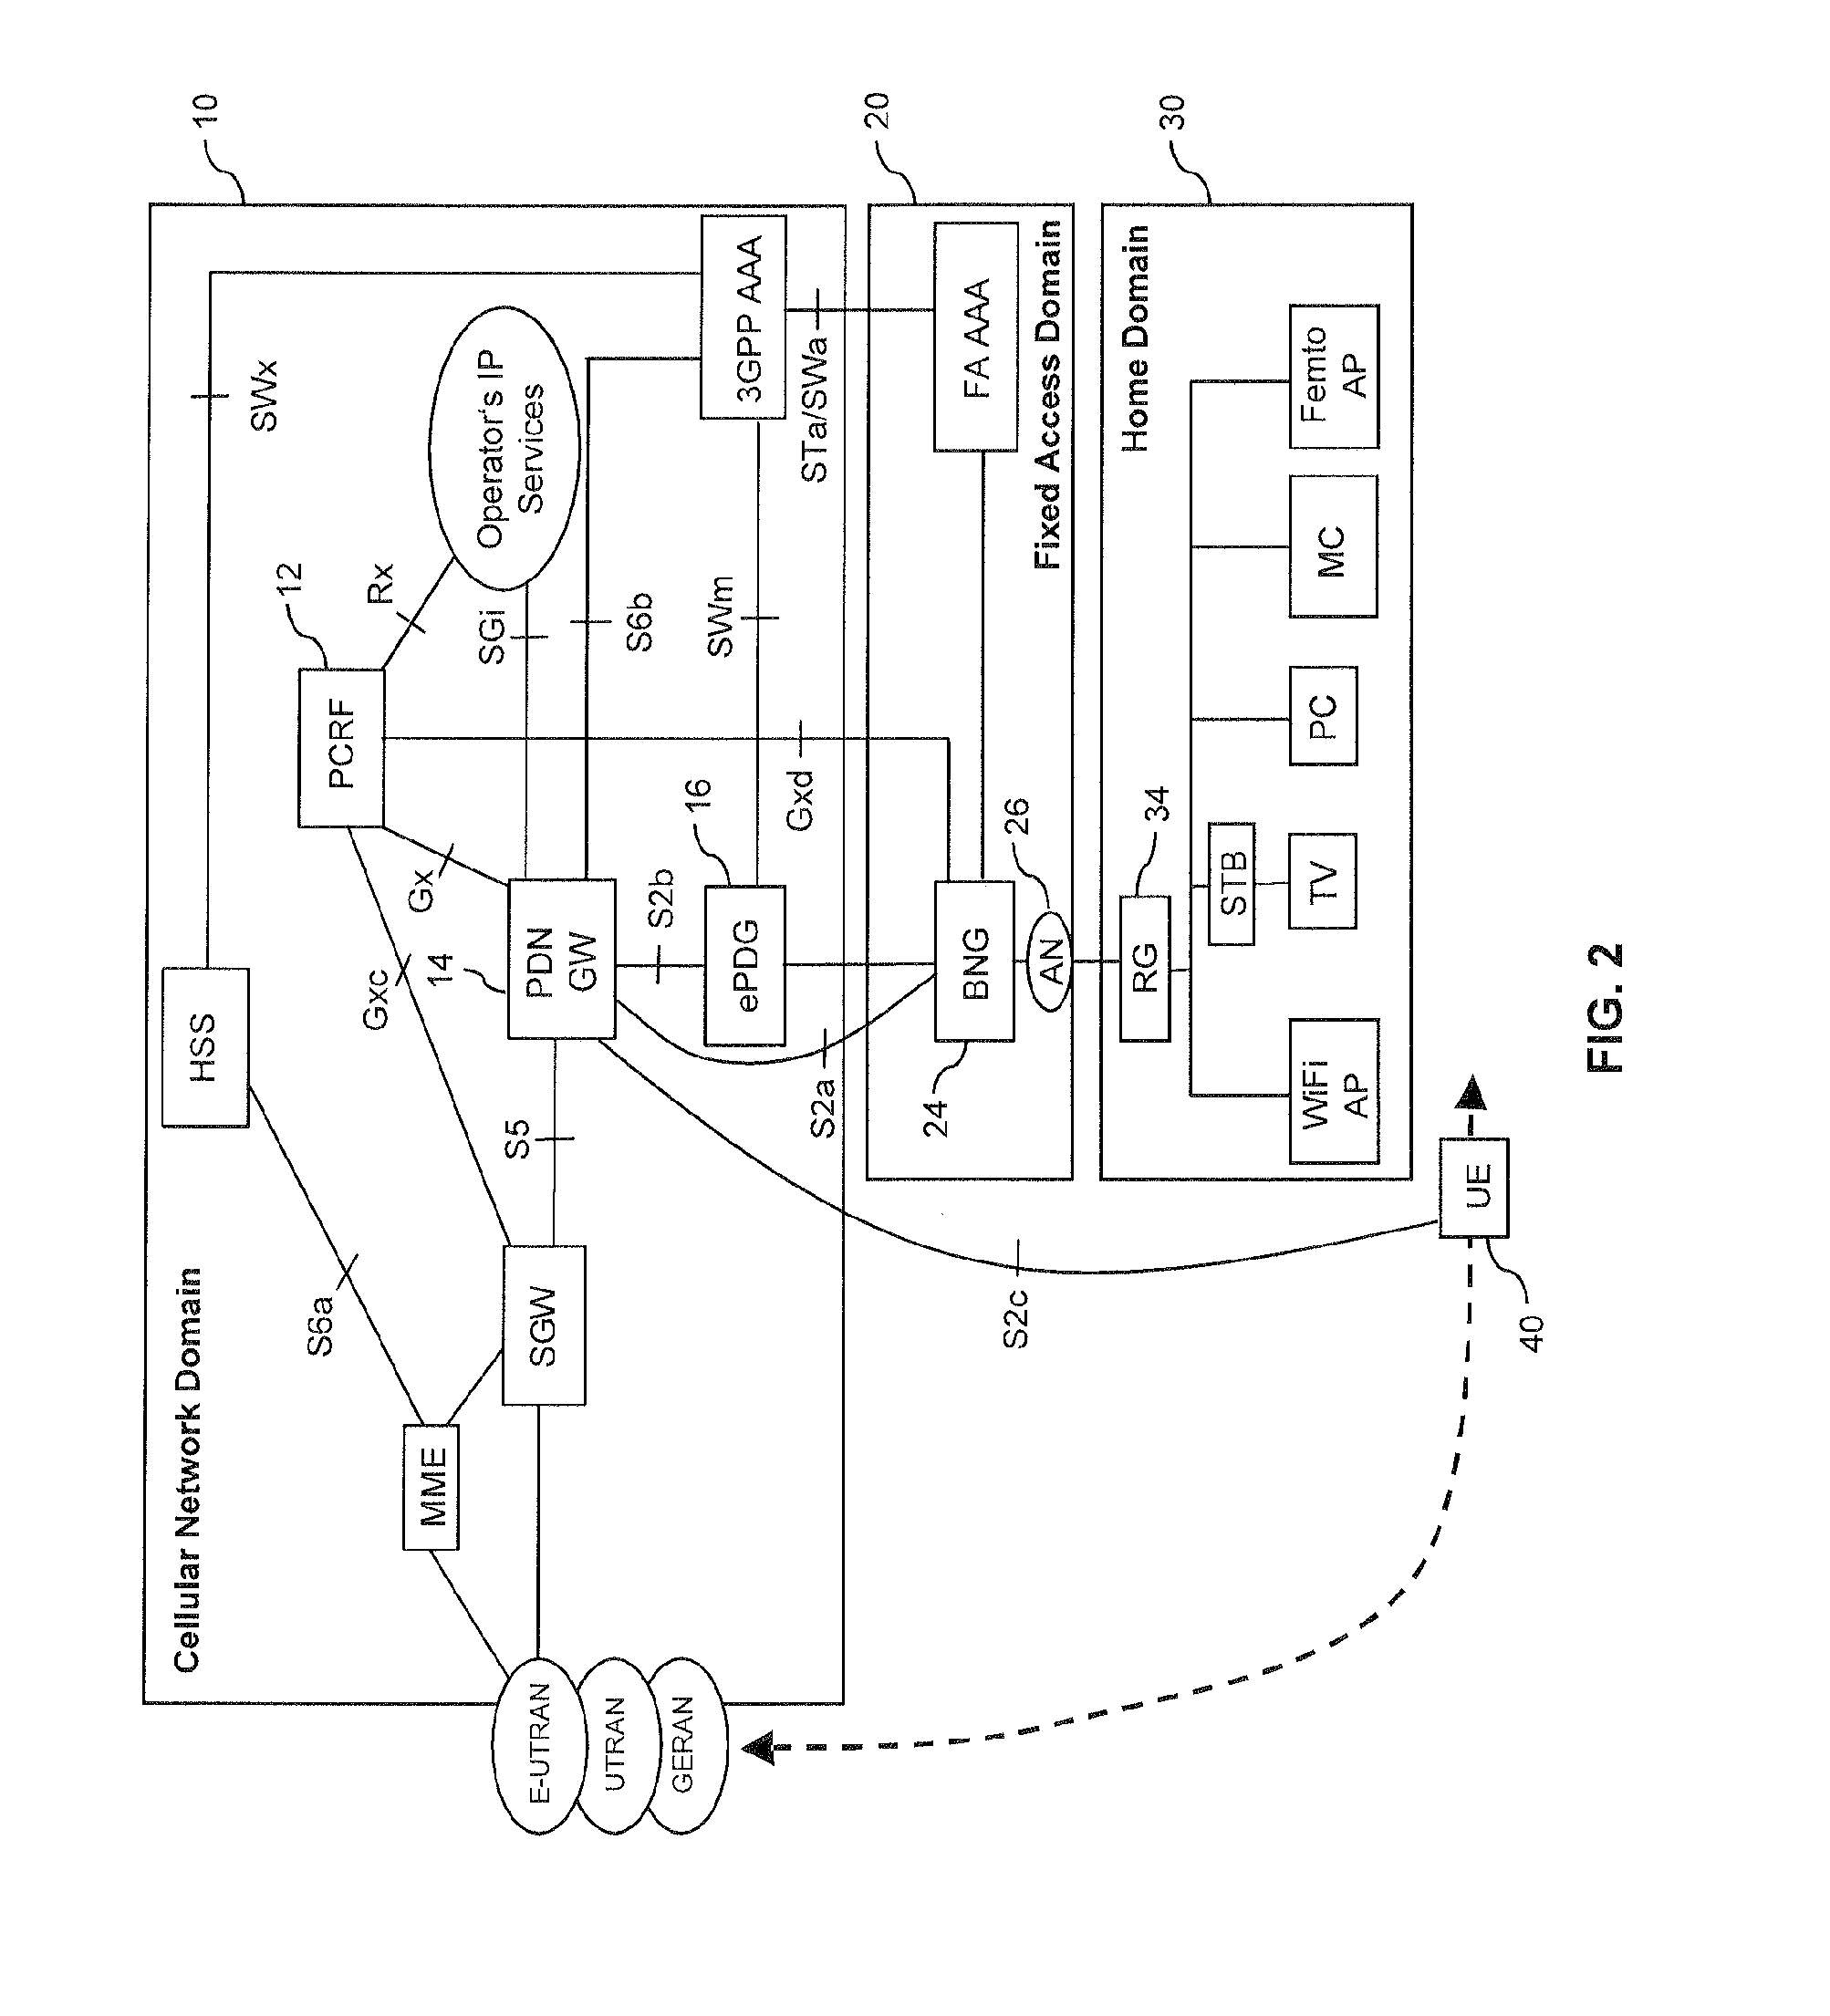 Routing of Traffic in a Multi-Domain Network